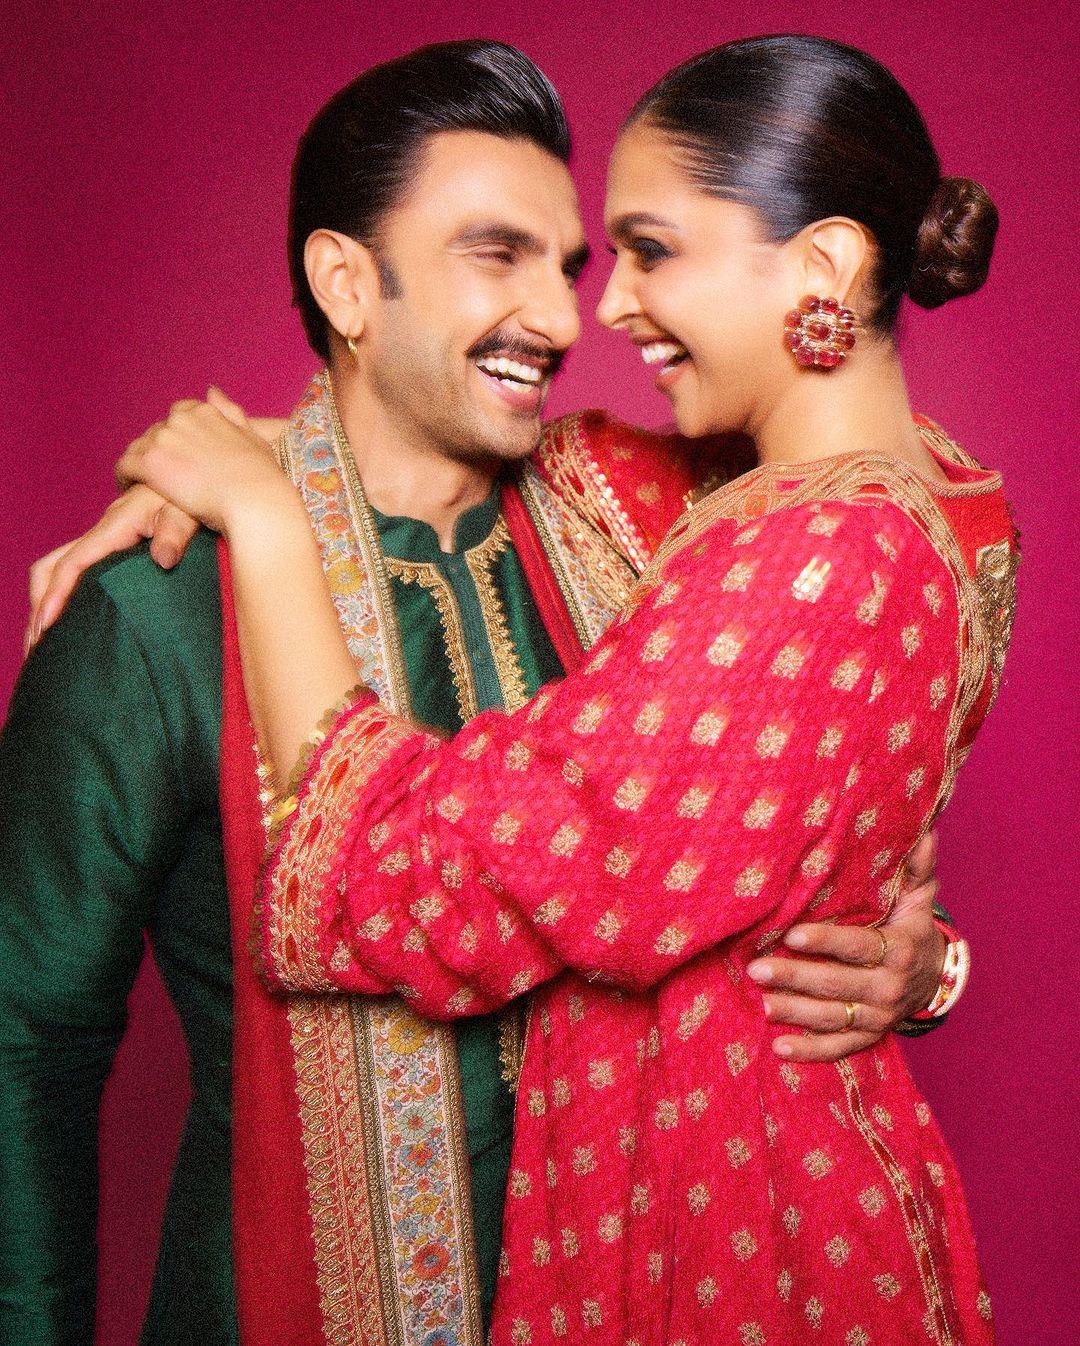 Deepika Padukone, ever the fashion diva, chose a crimson red kurta by  Sabyasachi Mukherjee. The golden embroidery, intricate threadwork, and statement V-neckline added an air of opulence to her ensemble. Ranveer Singh's dark green kurta adorned with golden embroidery. His matching churidar added an extra layer of sophistication to his look, proving once again the couple is the ultimate showstopper, even during festive occasions.